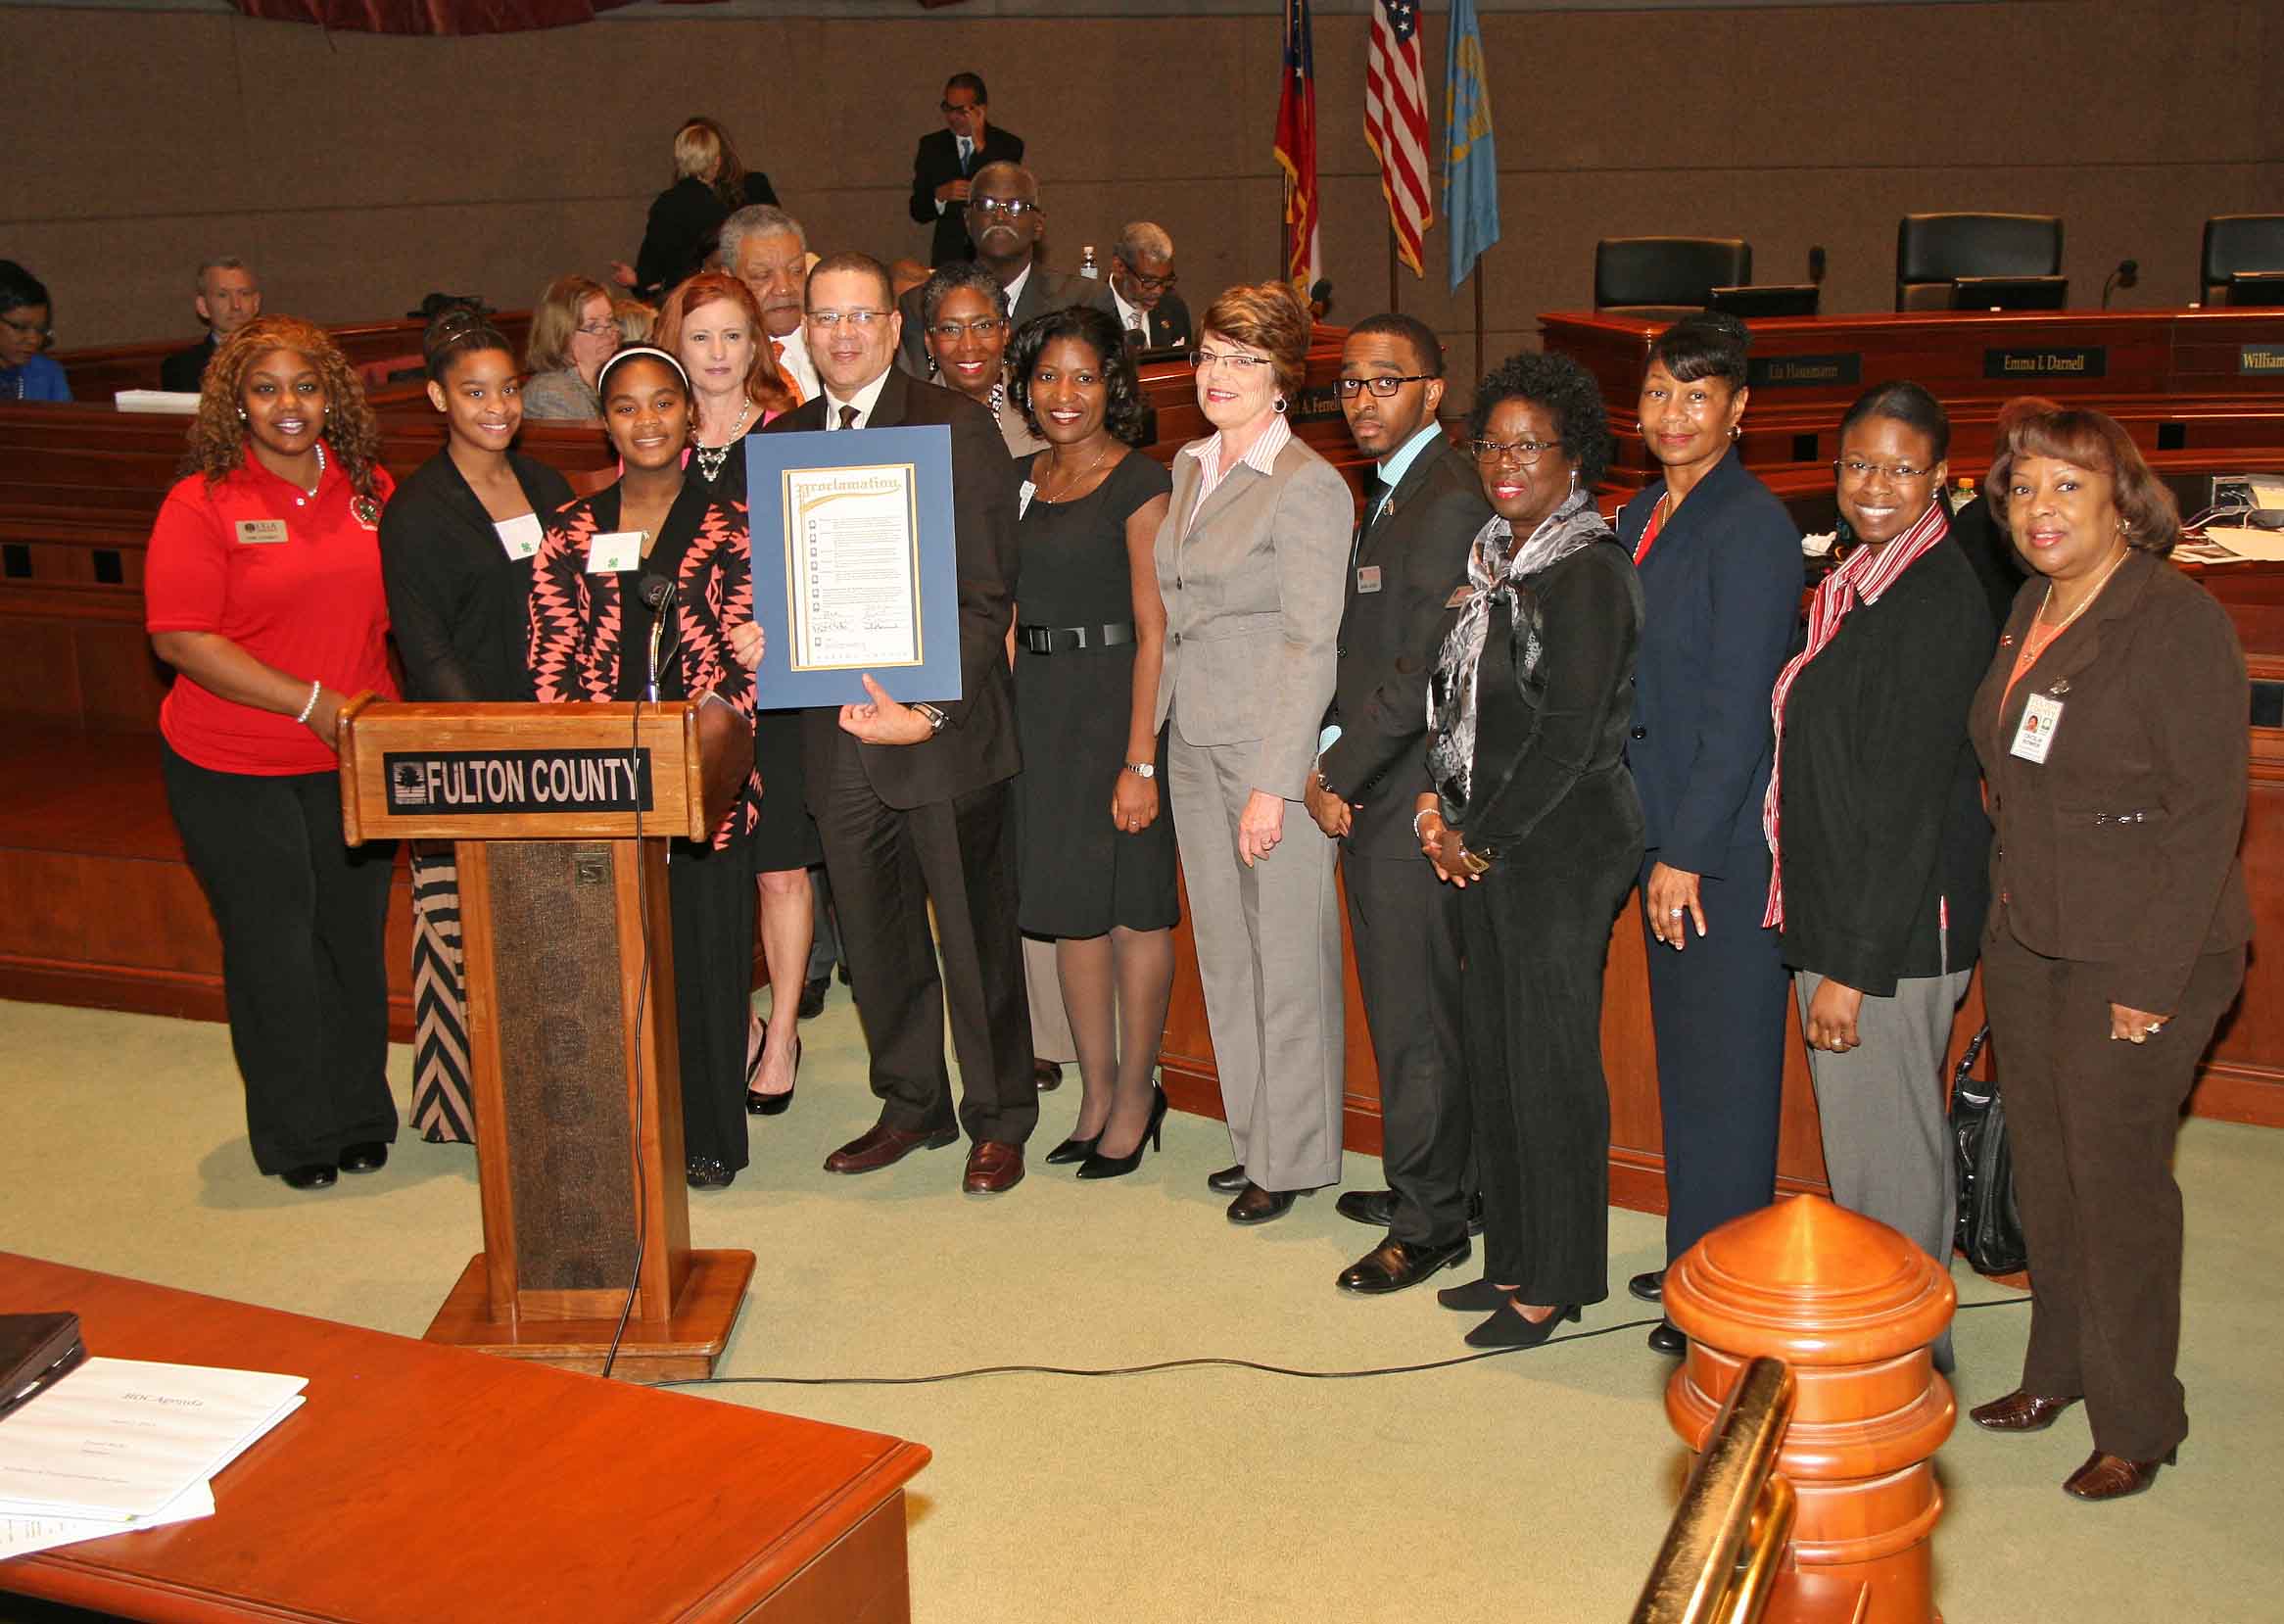 Fulton County Commission Chairman John Eaves presents a proclamation honoring UGA Extension's 100 years of service in Fulton County to County Extension Coordiantor Menia Chester, to his right; UGA Office of Environmental Sciences Director Susan Varlamoff, to her right, and the staff of the Fulton County UGA Extension Office.